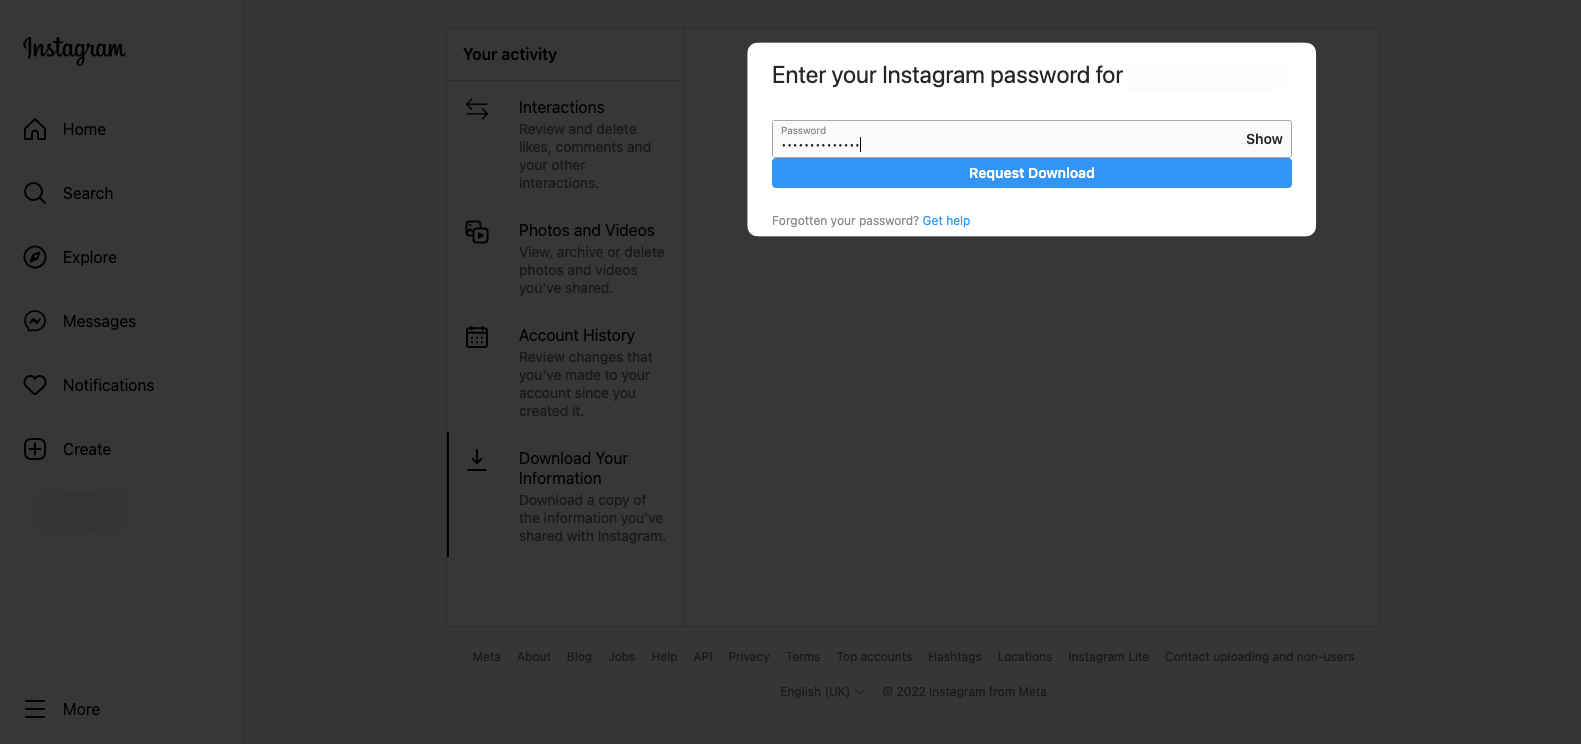 Remote.tools shows how to request download of information on Instagram to recover deleted Instagram messages